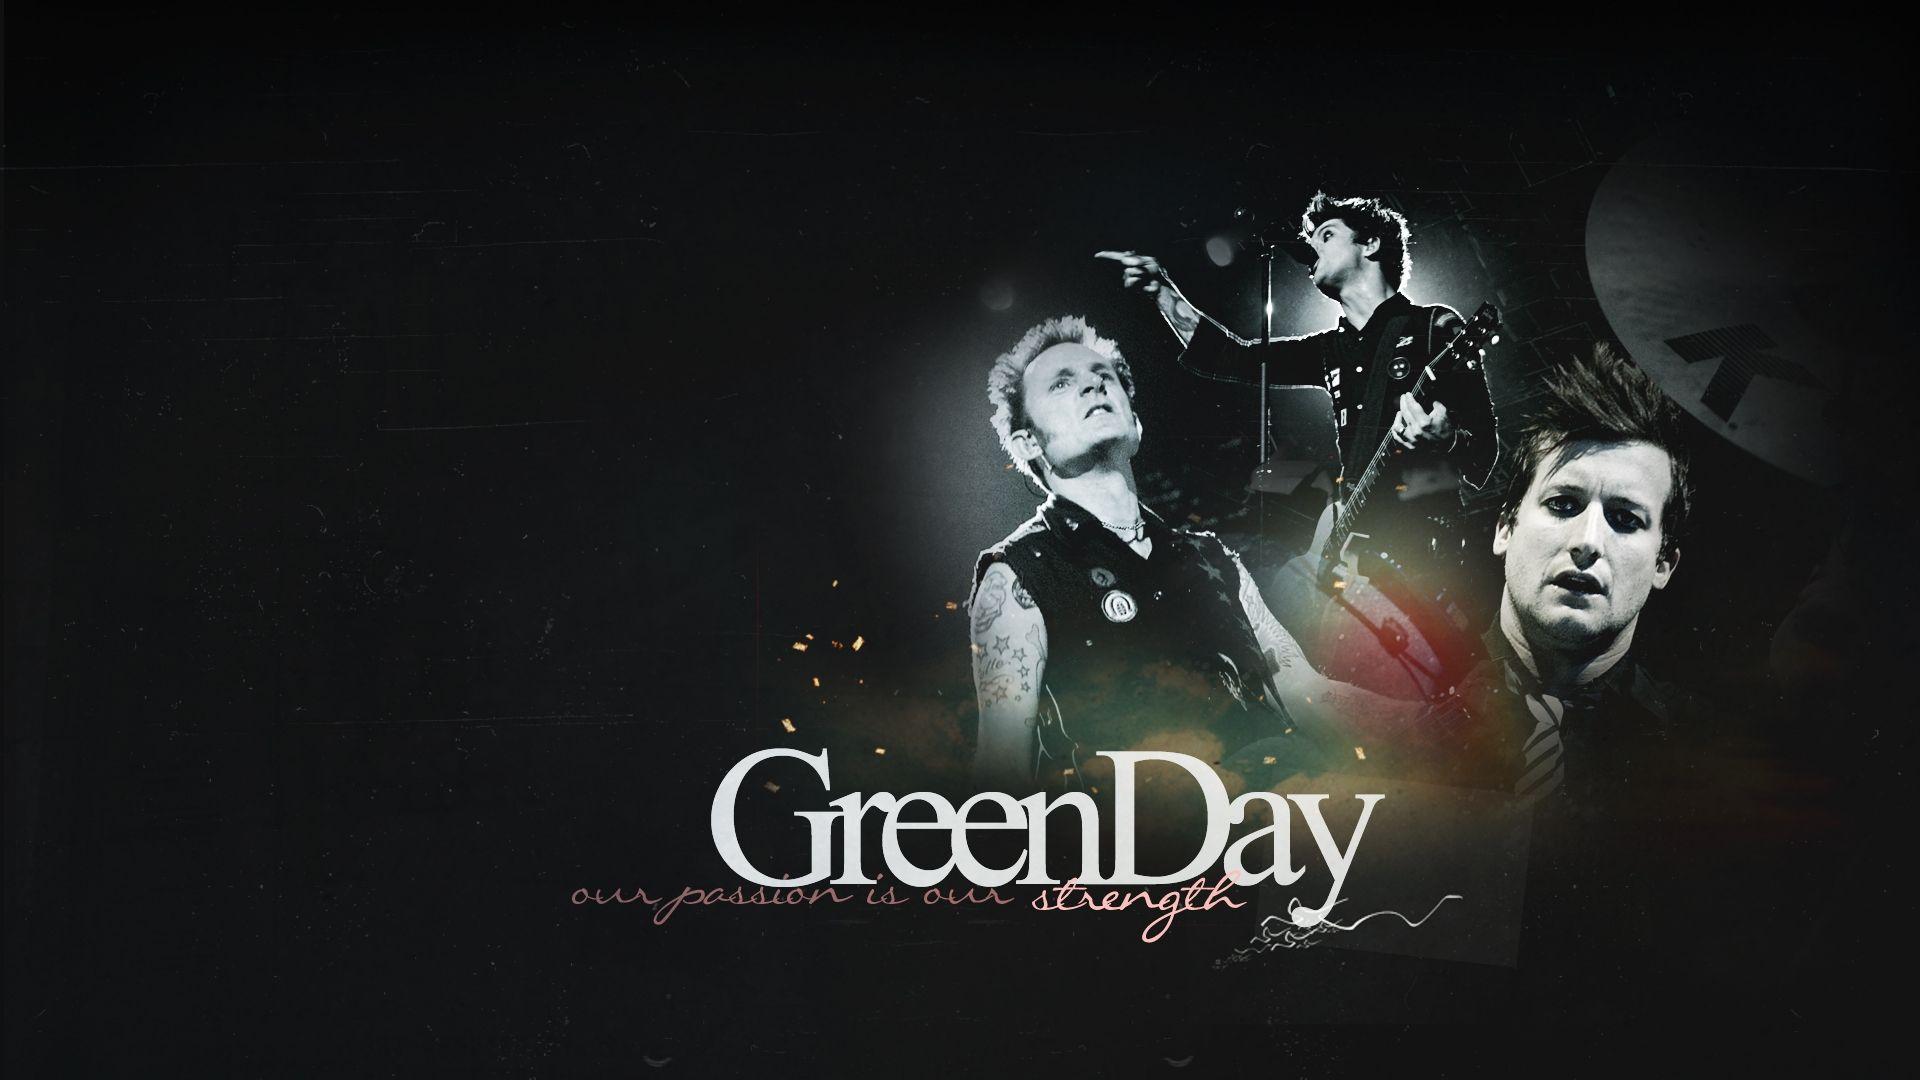 Download Wallpaper 1920x1080 green day, band, letters, concert